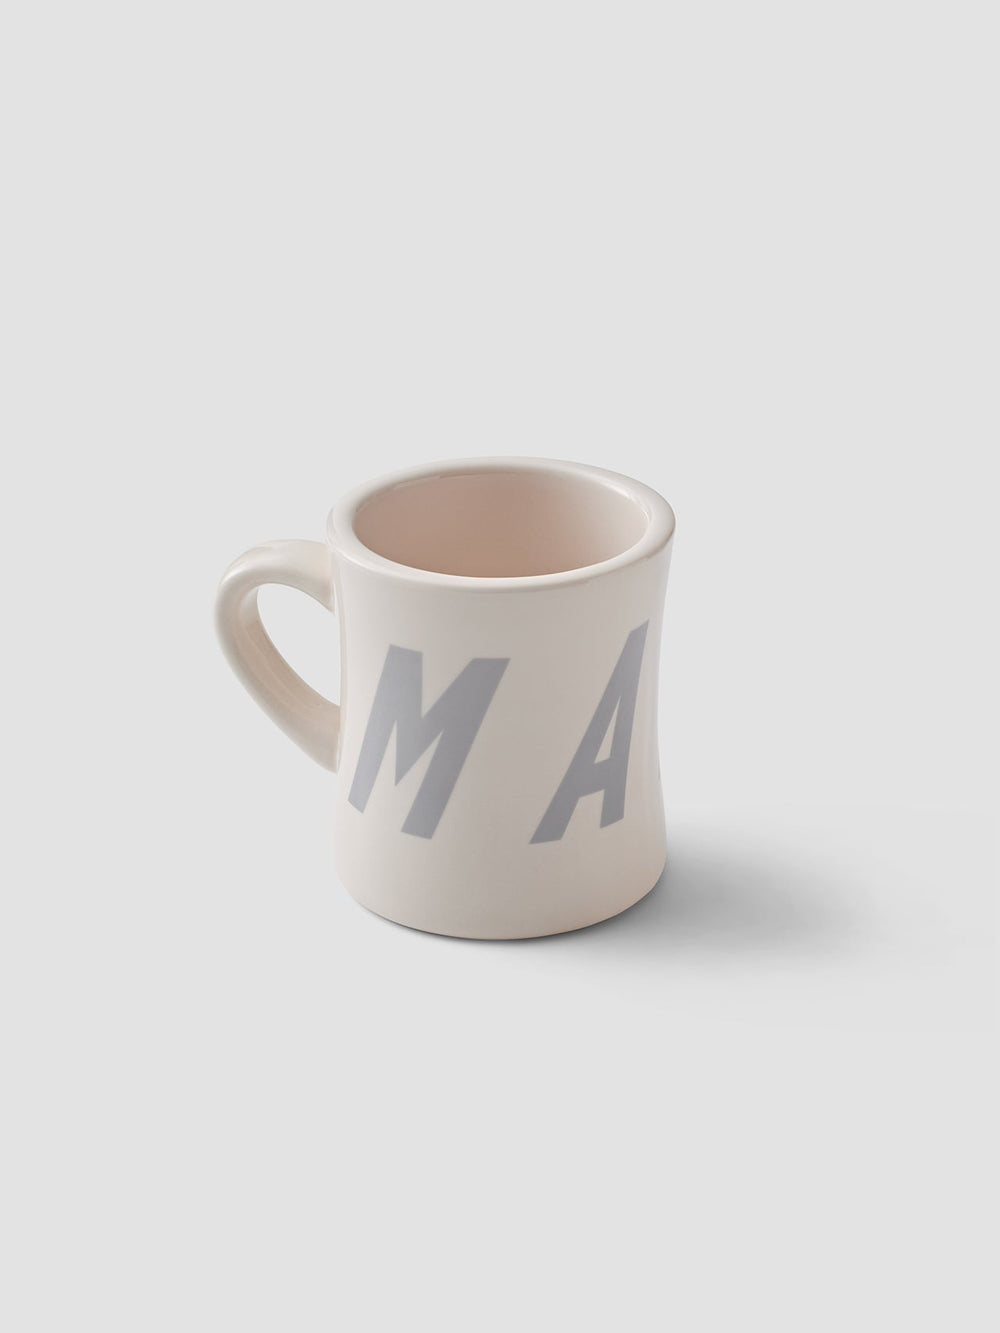 Product Image for MAAP Diner Mug